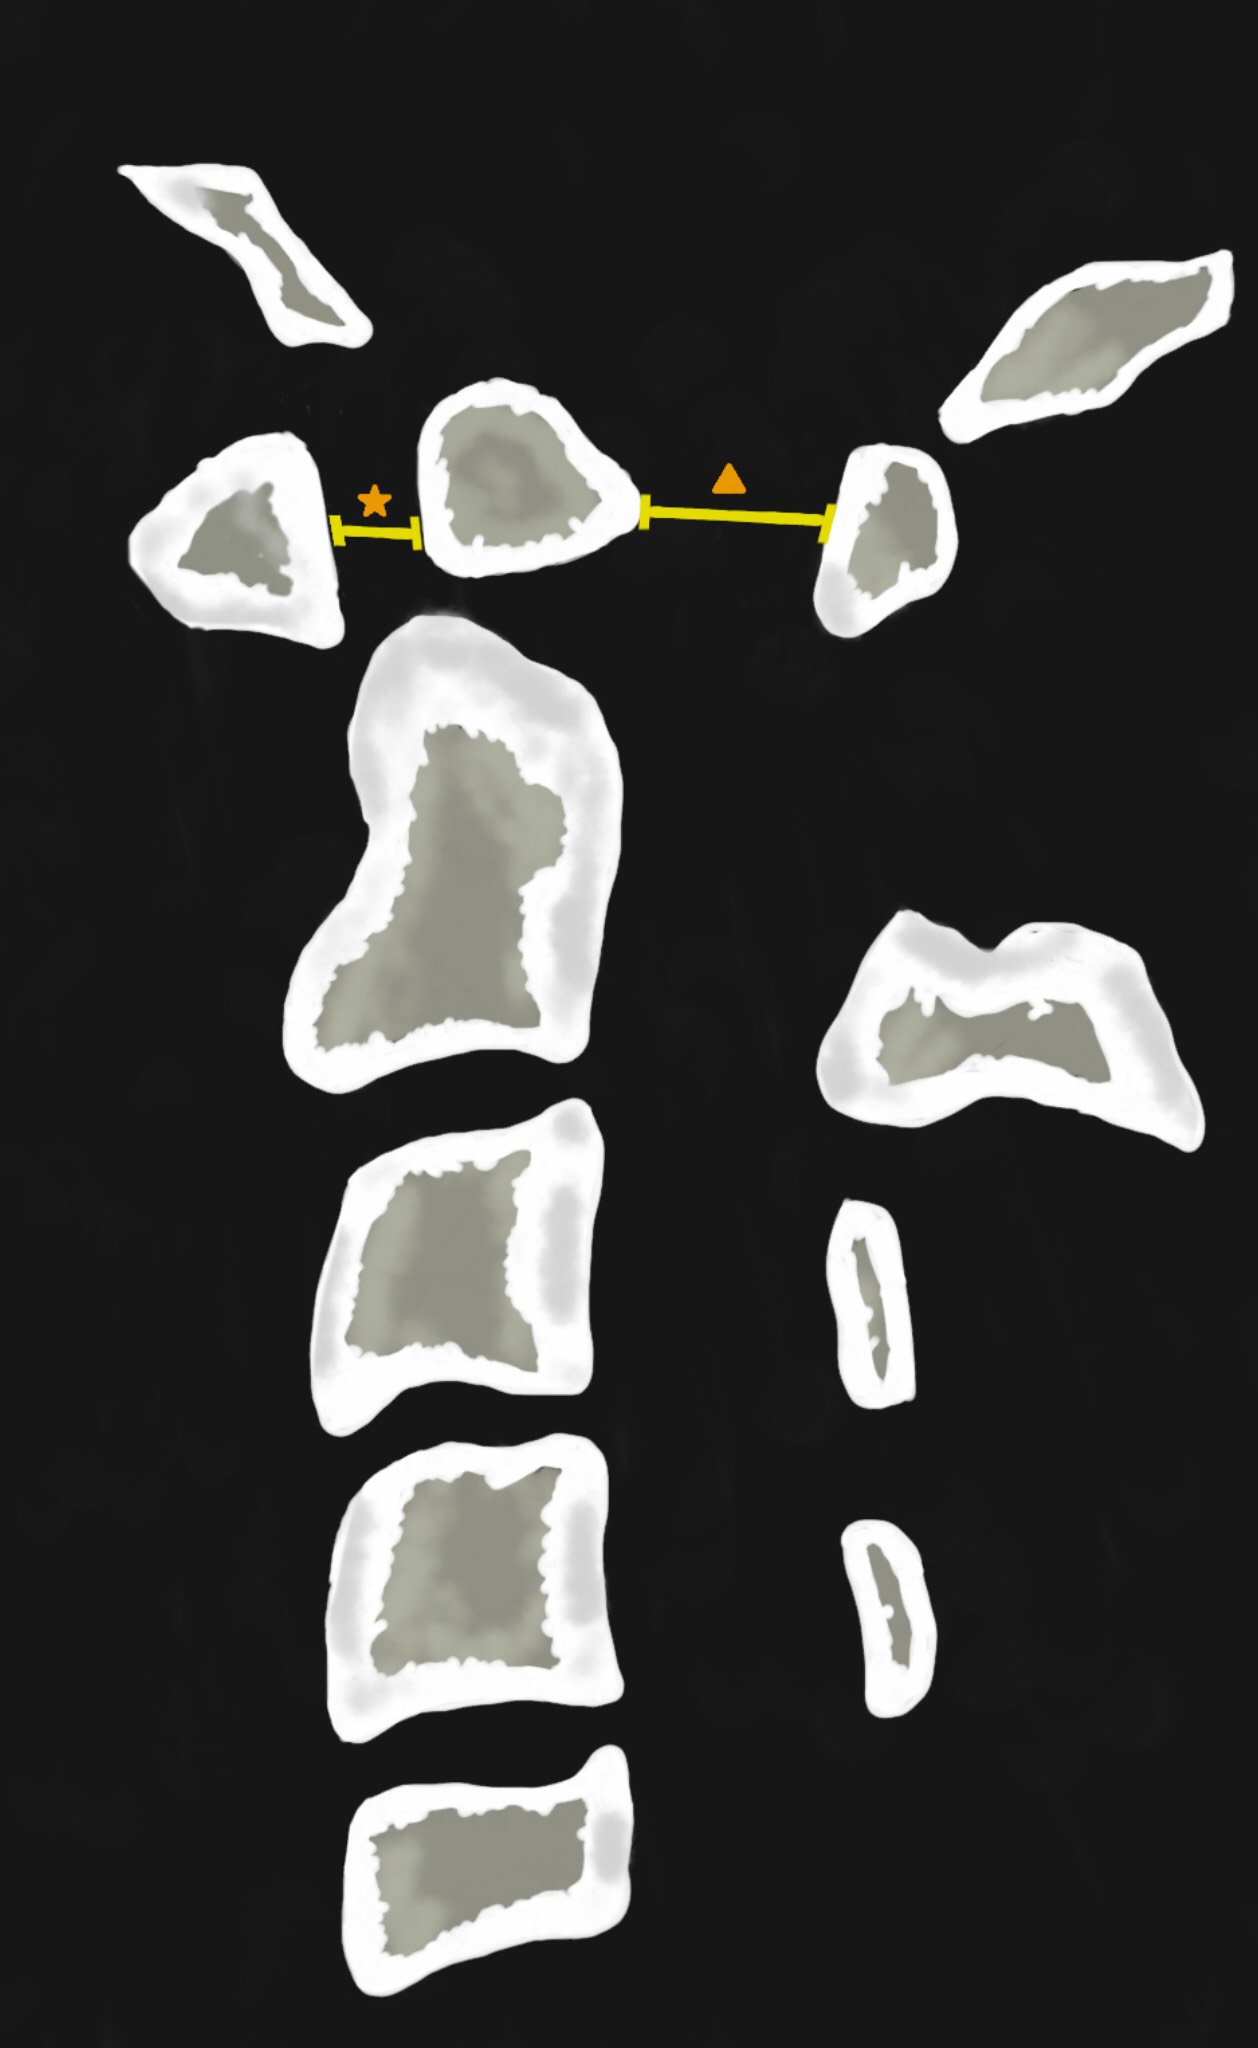 Figure 1 - Illustration that represents an upper cervical spine lateral view. It shows an oval or round-shaped ossicle with smooth circumferential cortical margins representing a hypoplastic odontoid process that has no continuity with the C2 vertebral body. The atlanto-dens interval (ADI) (orange star) is the distance between the odontoid process and the posterior border of the anterior arch of the atlas. The space-available-cord (SAC) or posterior atlanto-dens-interval (PADI) (orange triangle) is the distance between the posterior surface of dens and the anterior surface of the posterior arch of the atlas.